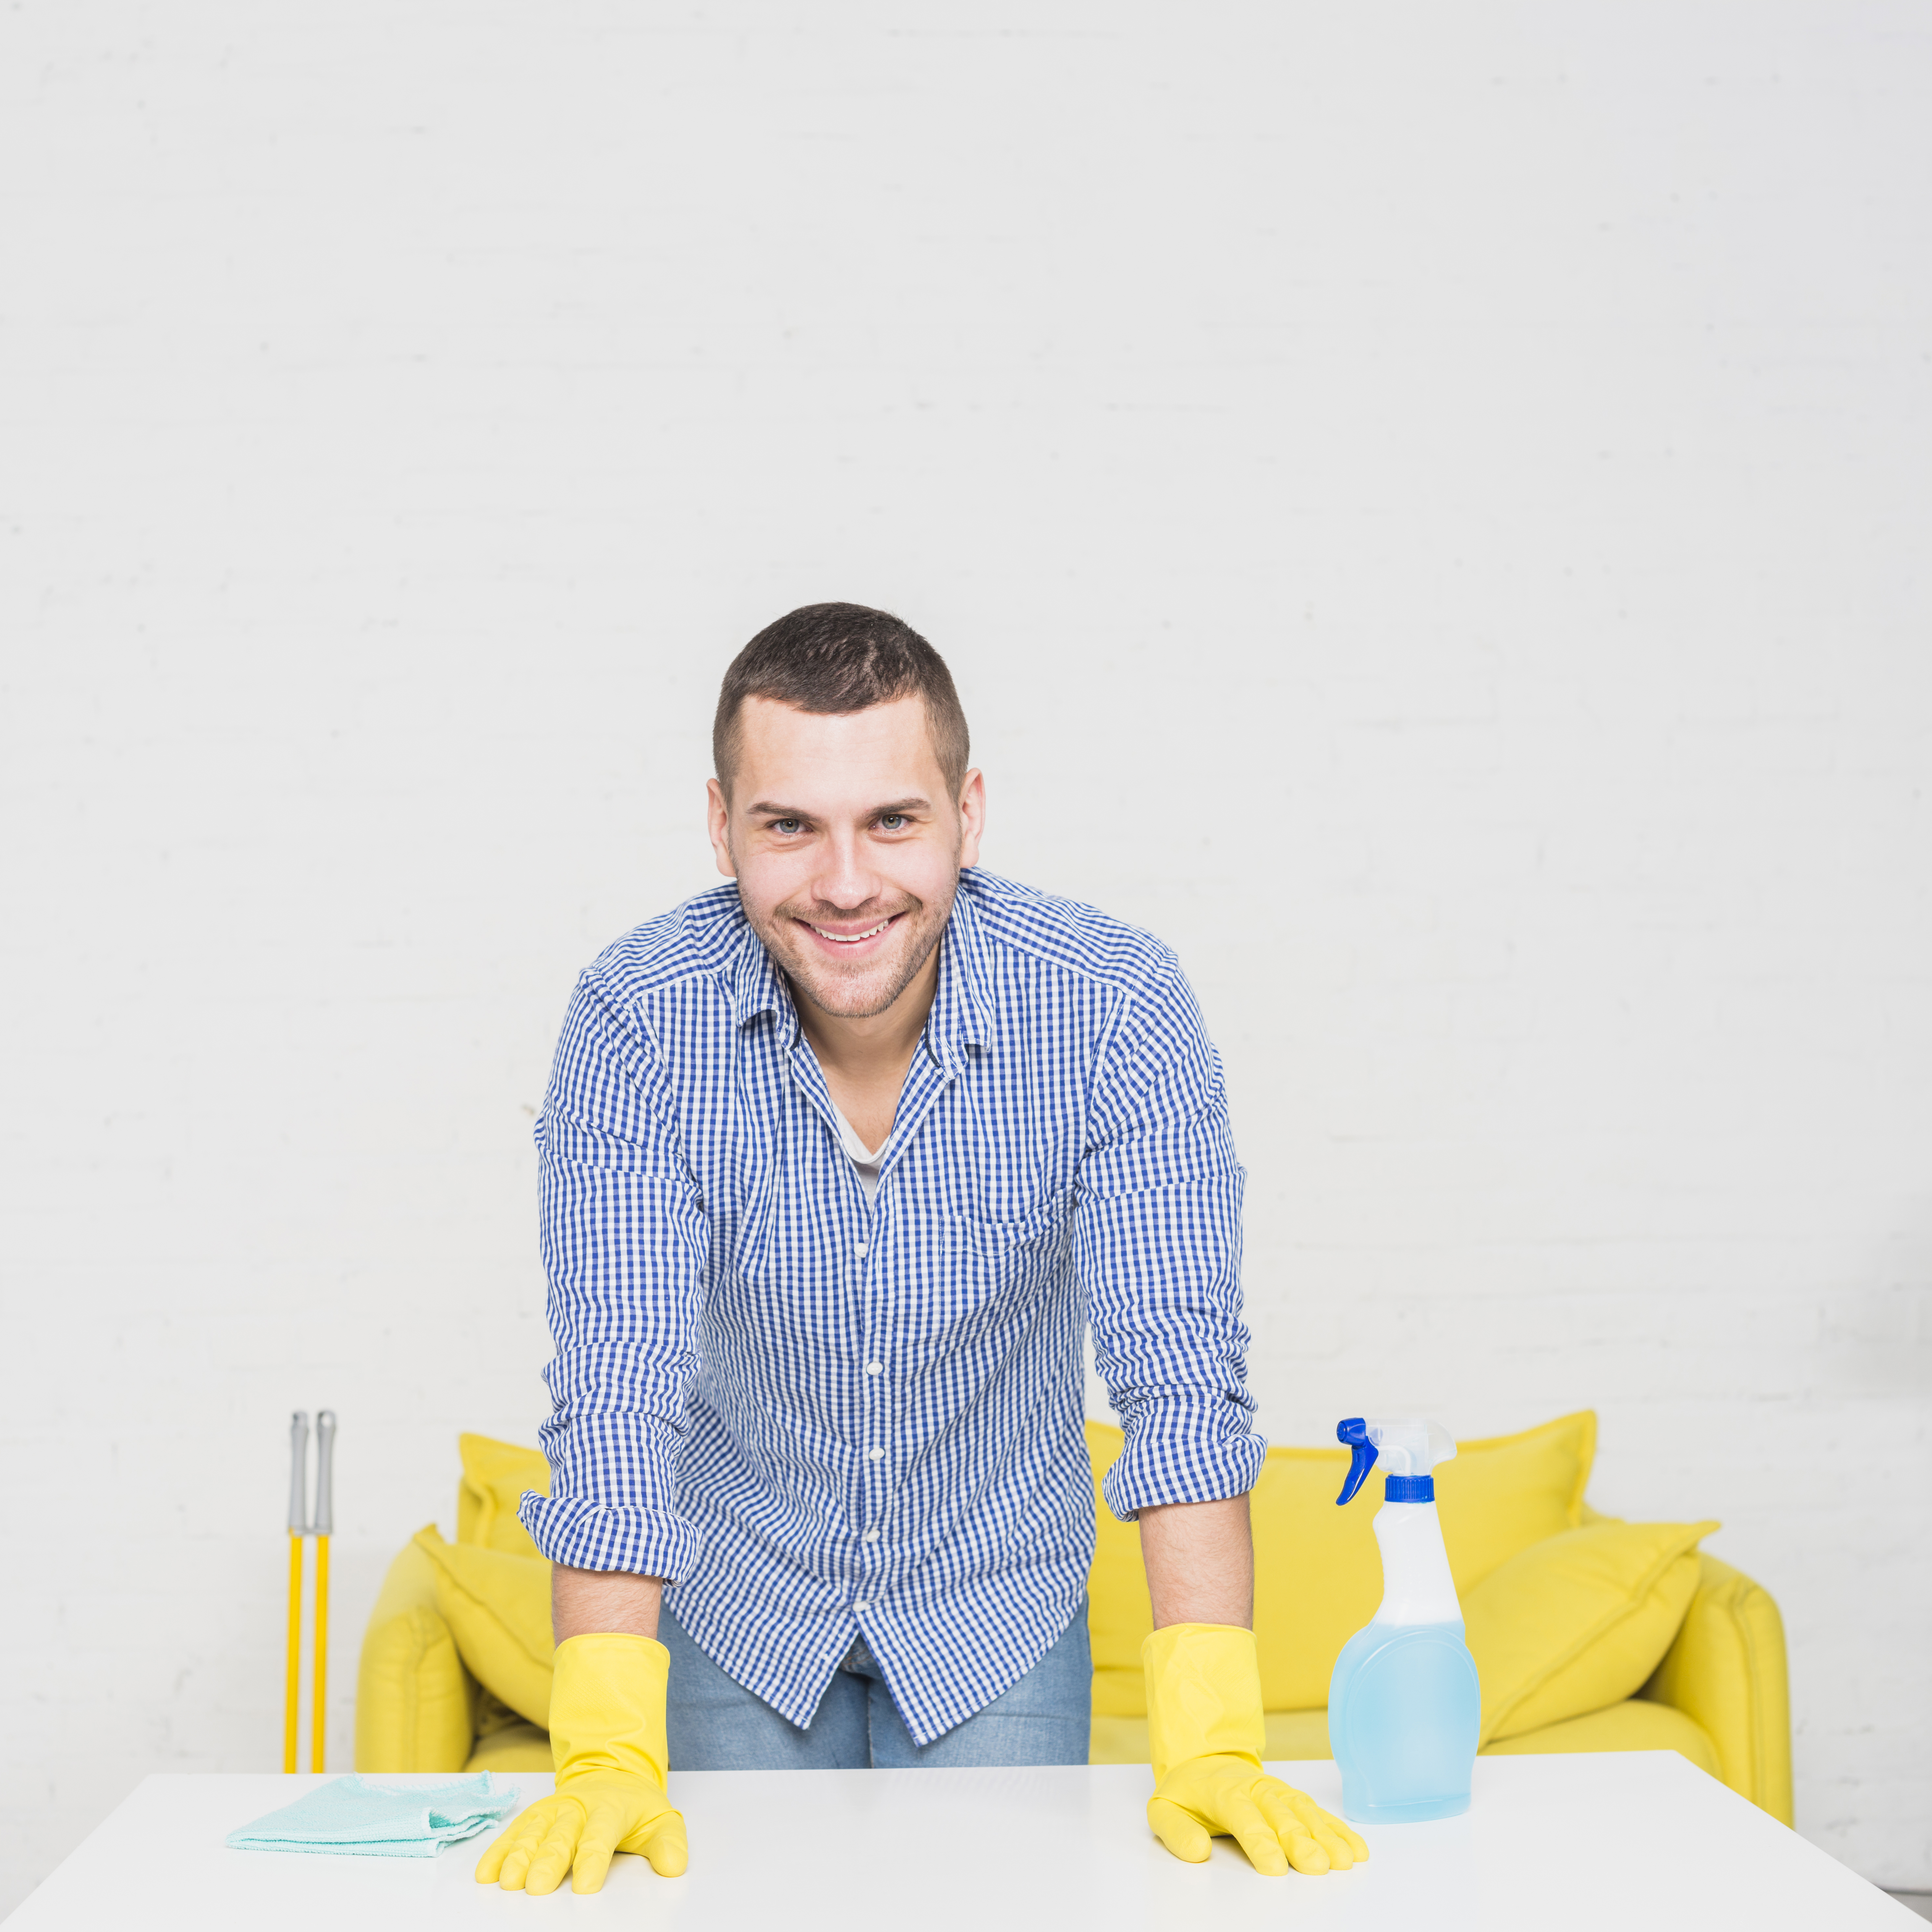 Man smiling as he's surrounded by cleaning materials | Source: Freepik